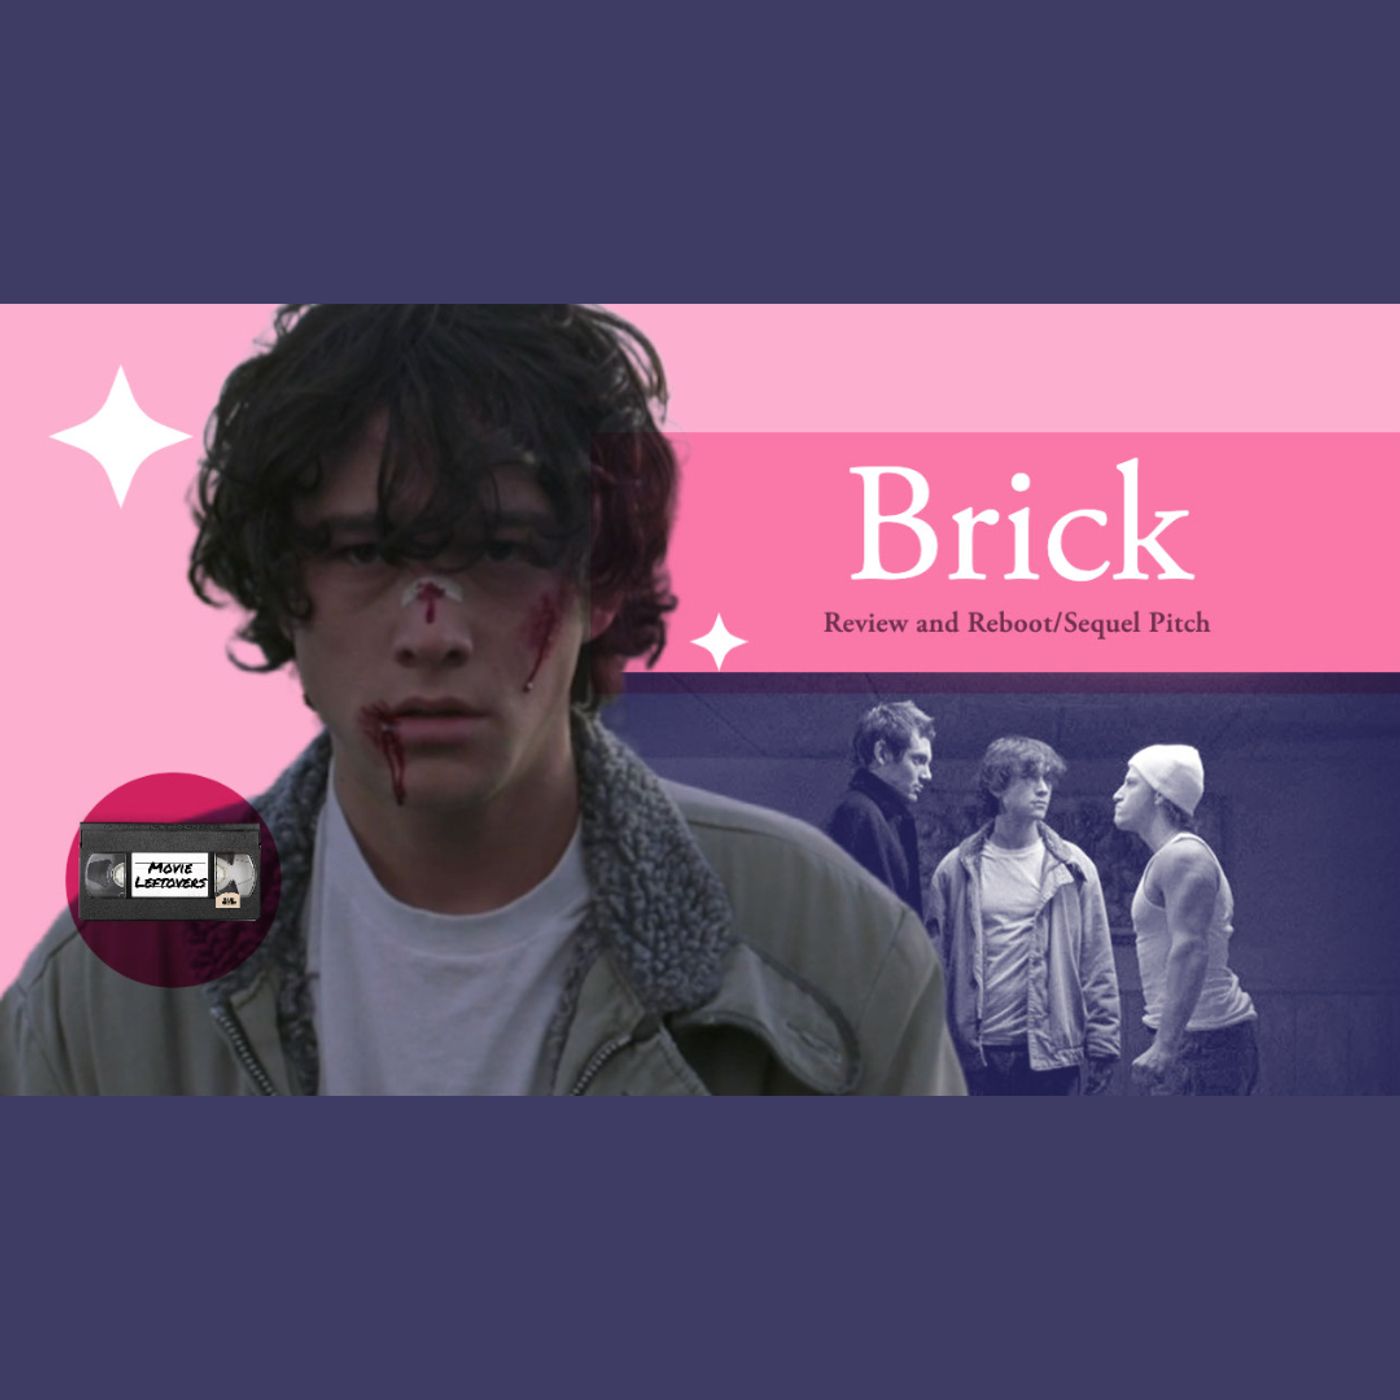 Movie Leftovers: Brick (2005) Film Nori in a 90s high school! This rules!